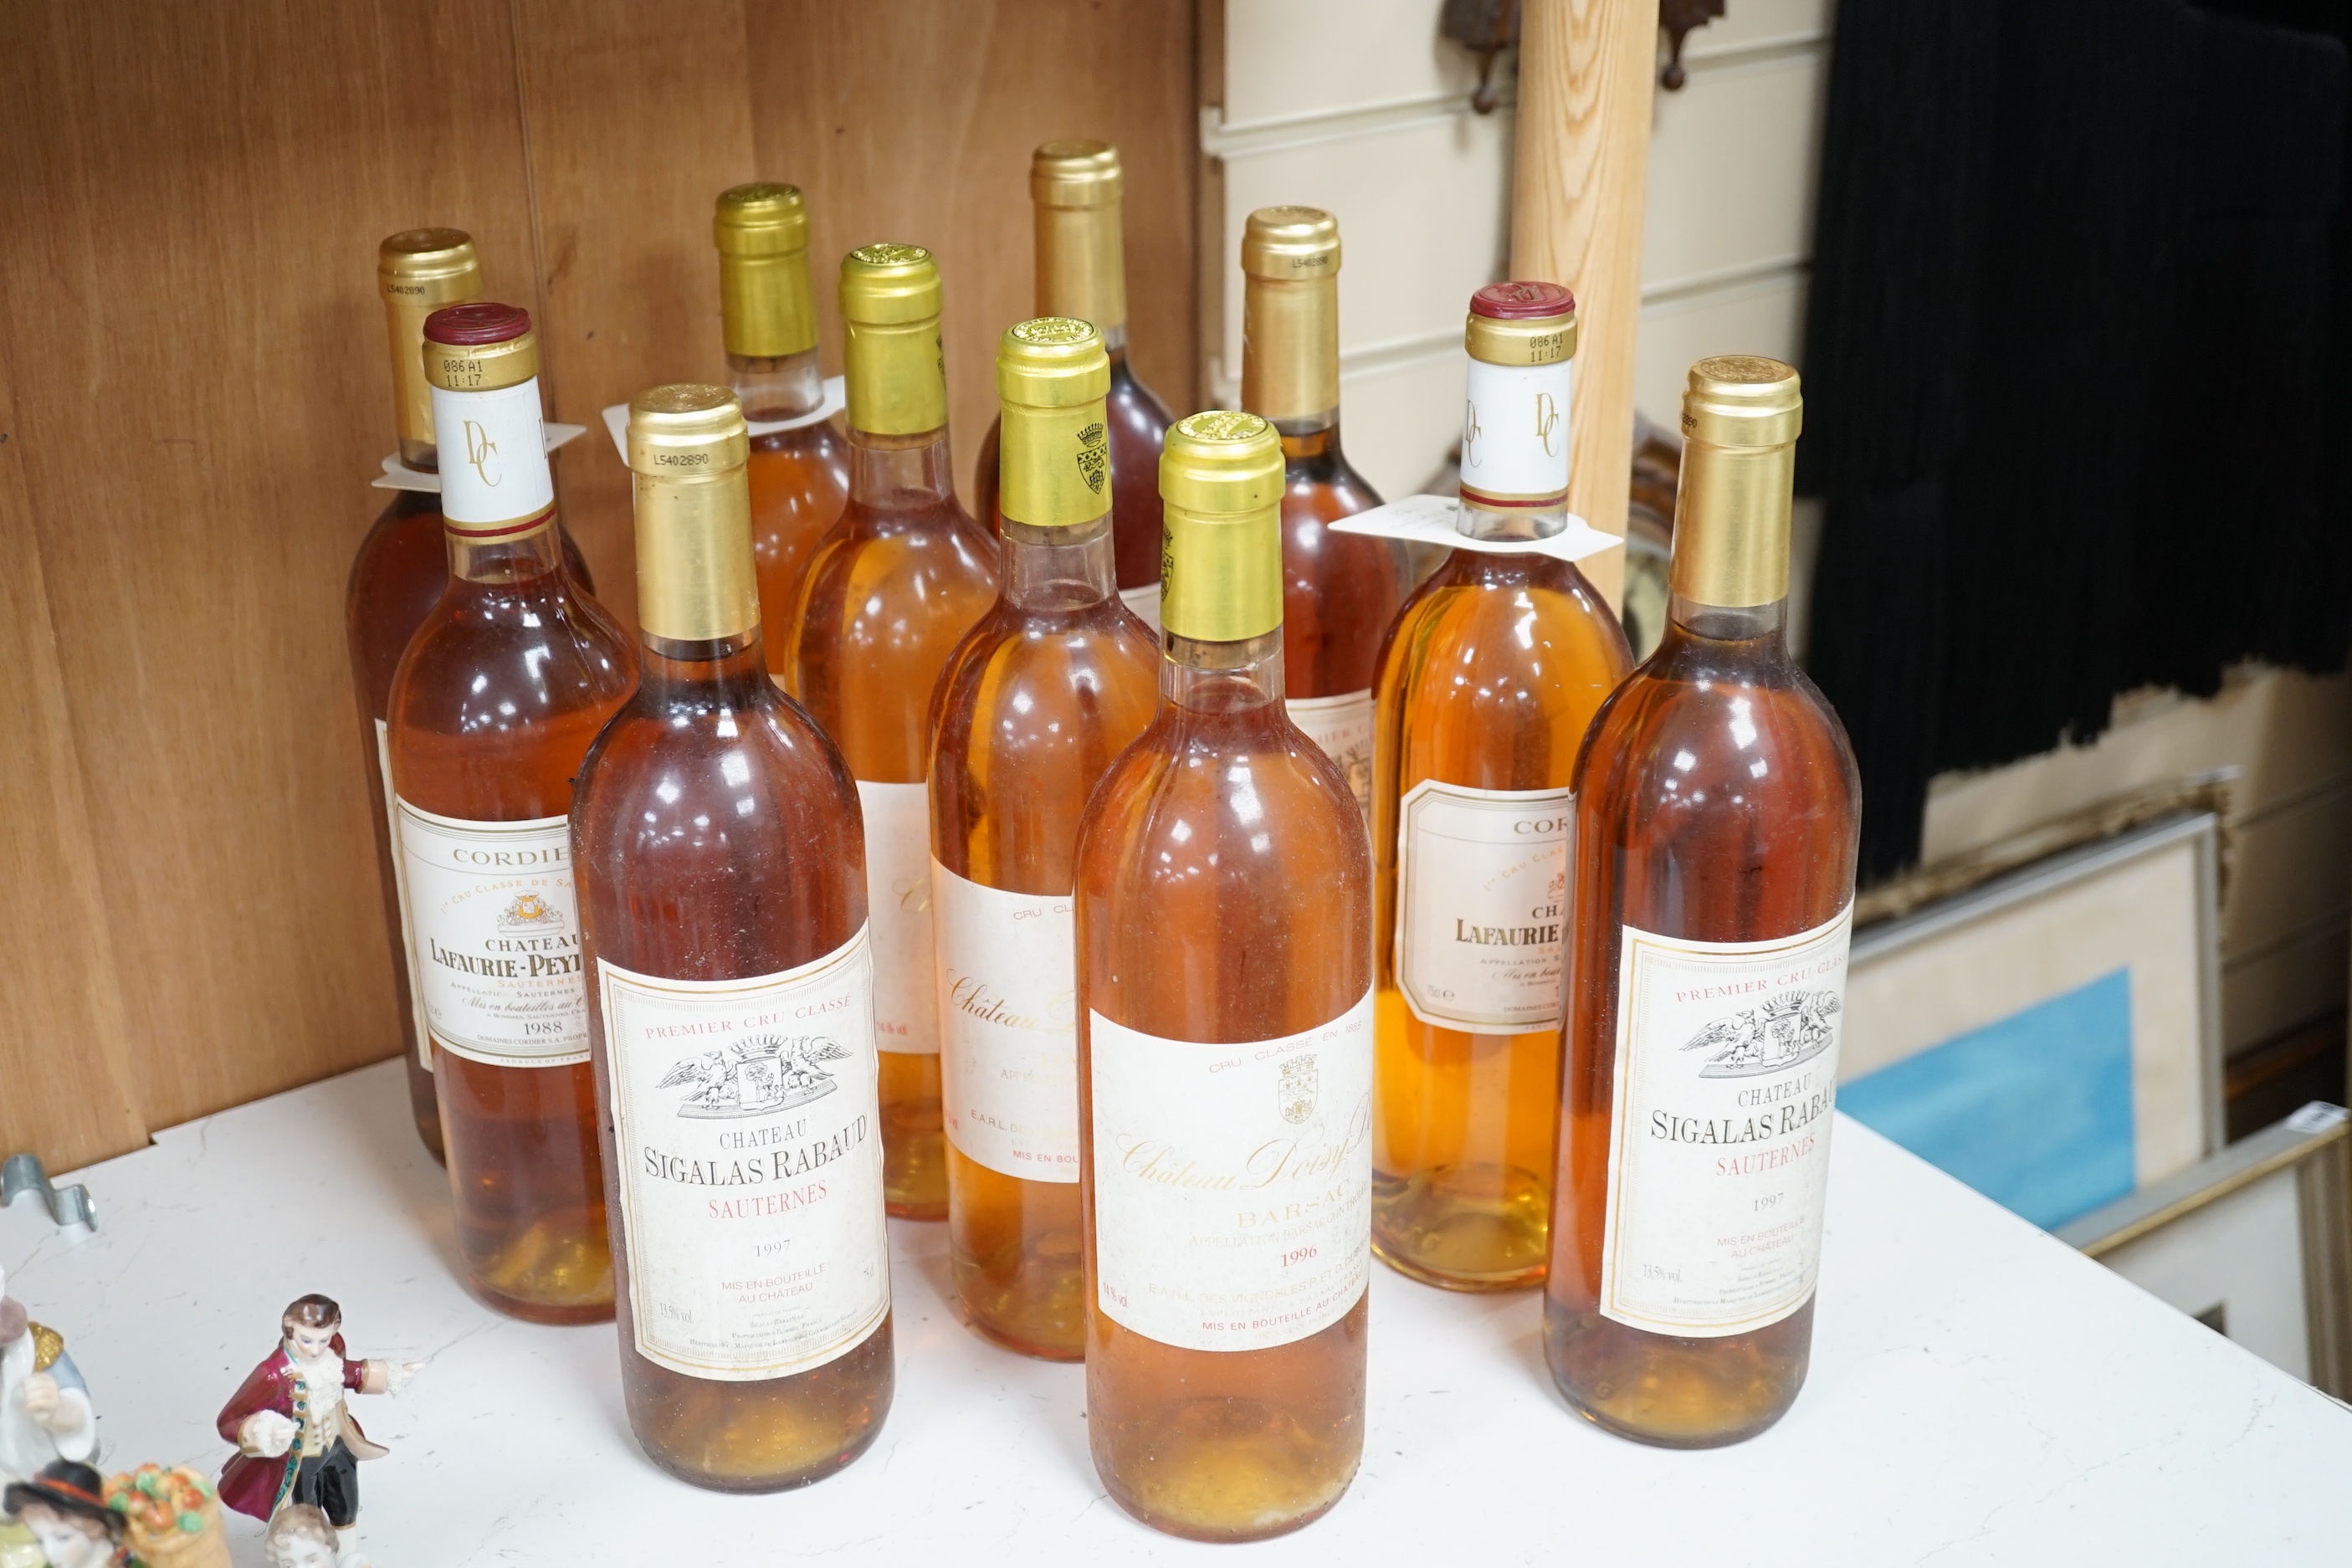 Three bottles of Chateau Lafaurie-Peyraguey 1988 Sauternes, five bottles of Chateau Doisy Daene 1996 and six bottles of Chateau Sigalas Rabaul 1997